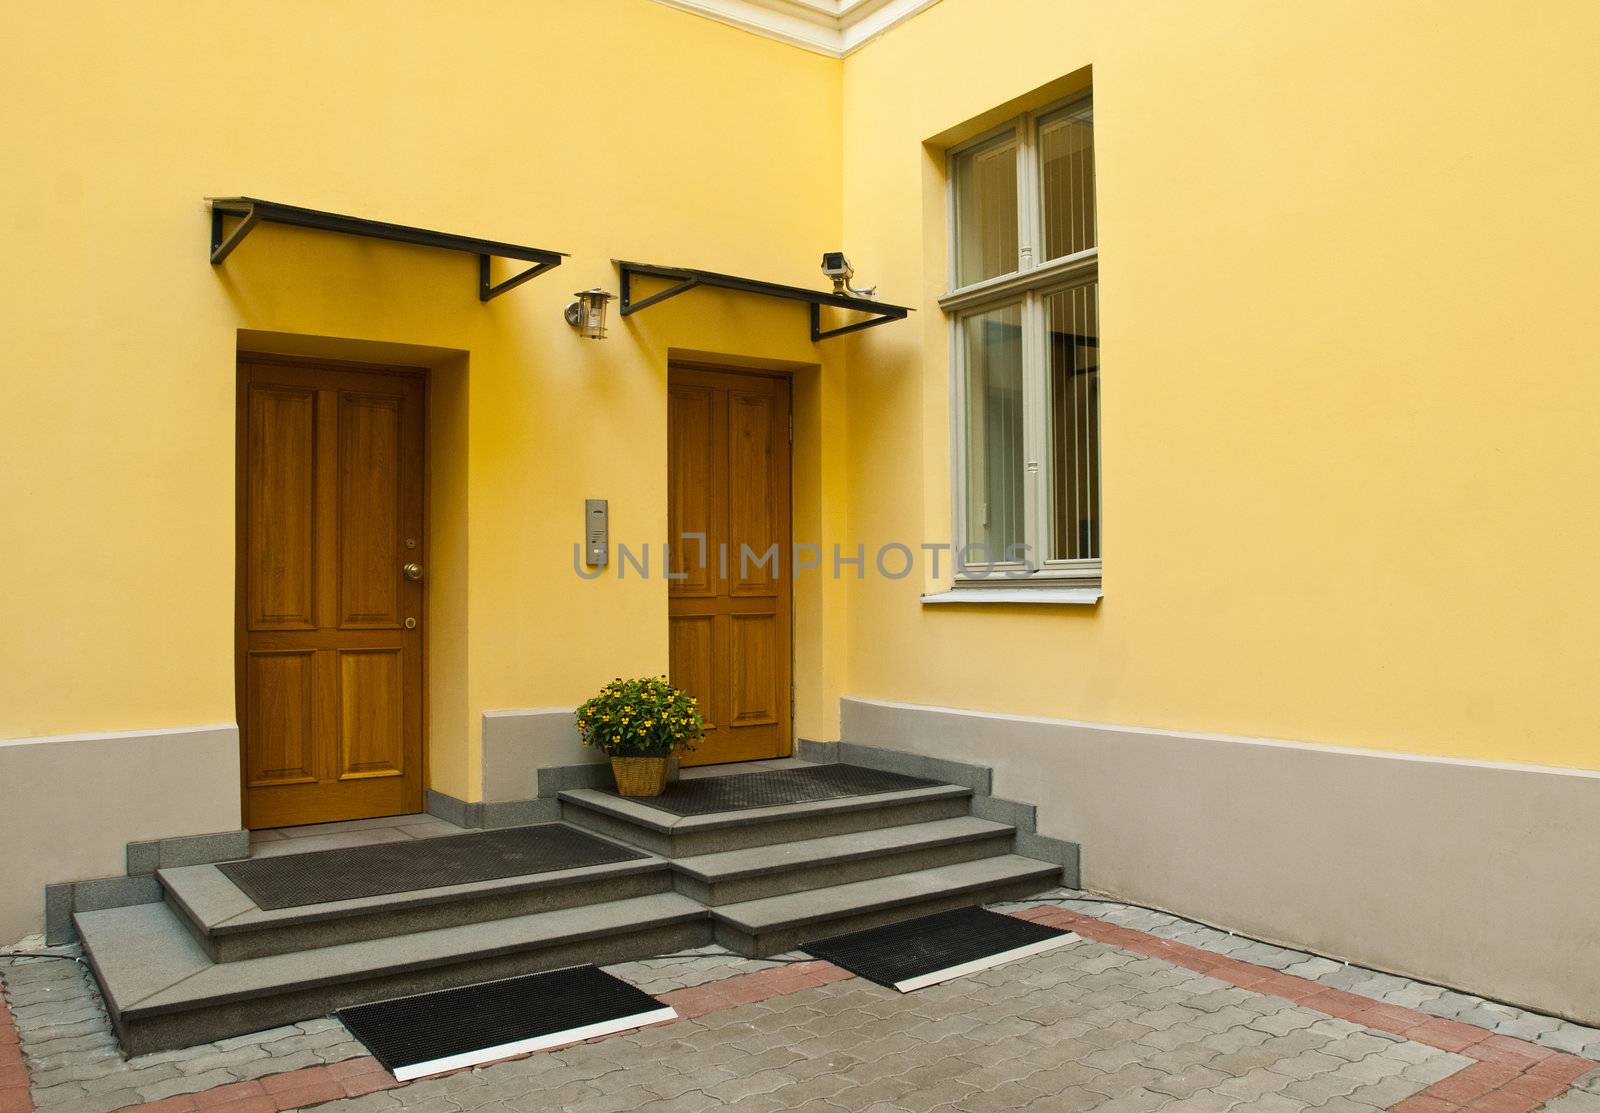 Entrance to yellow home - two brown metal doors and window